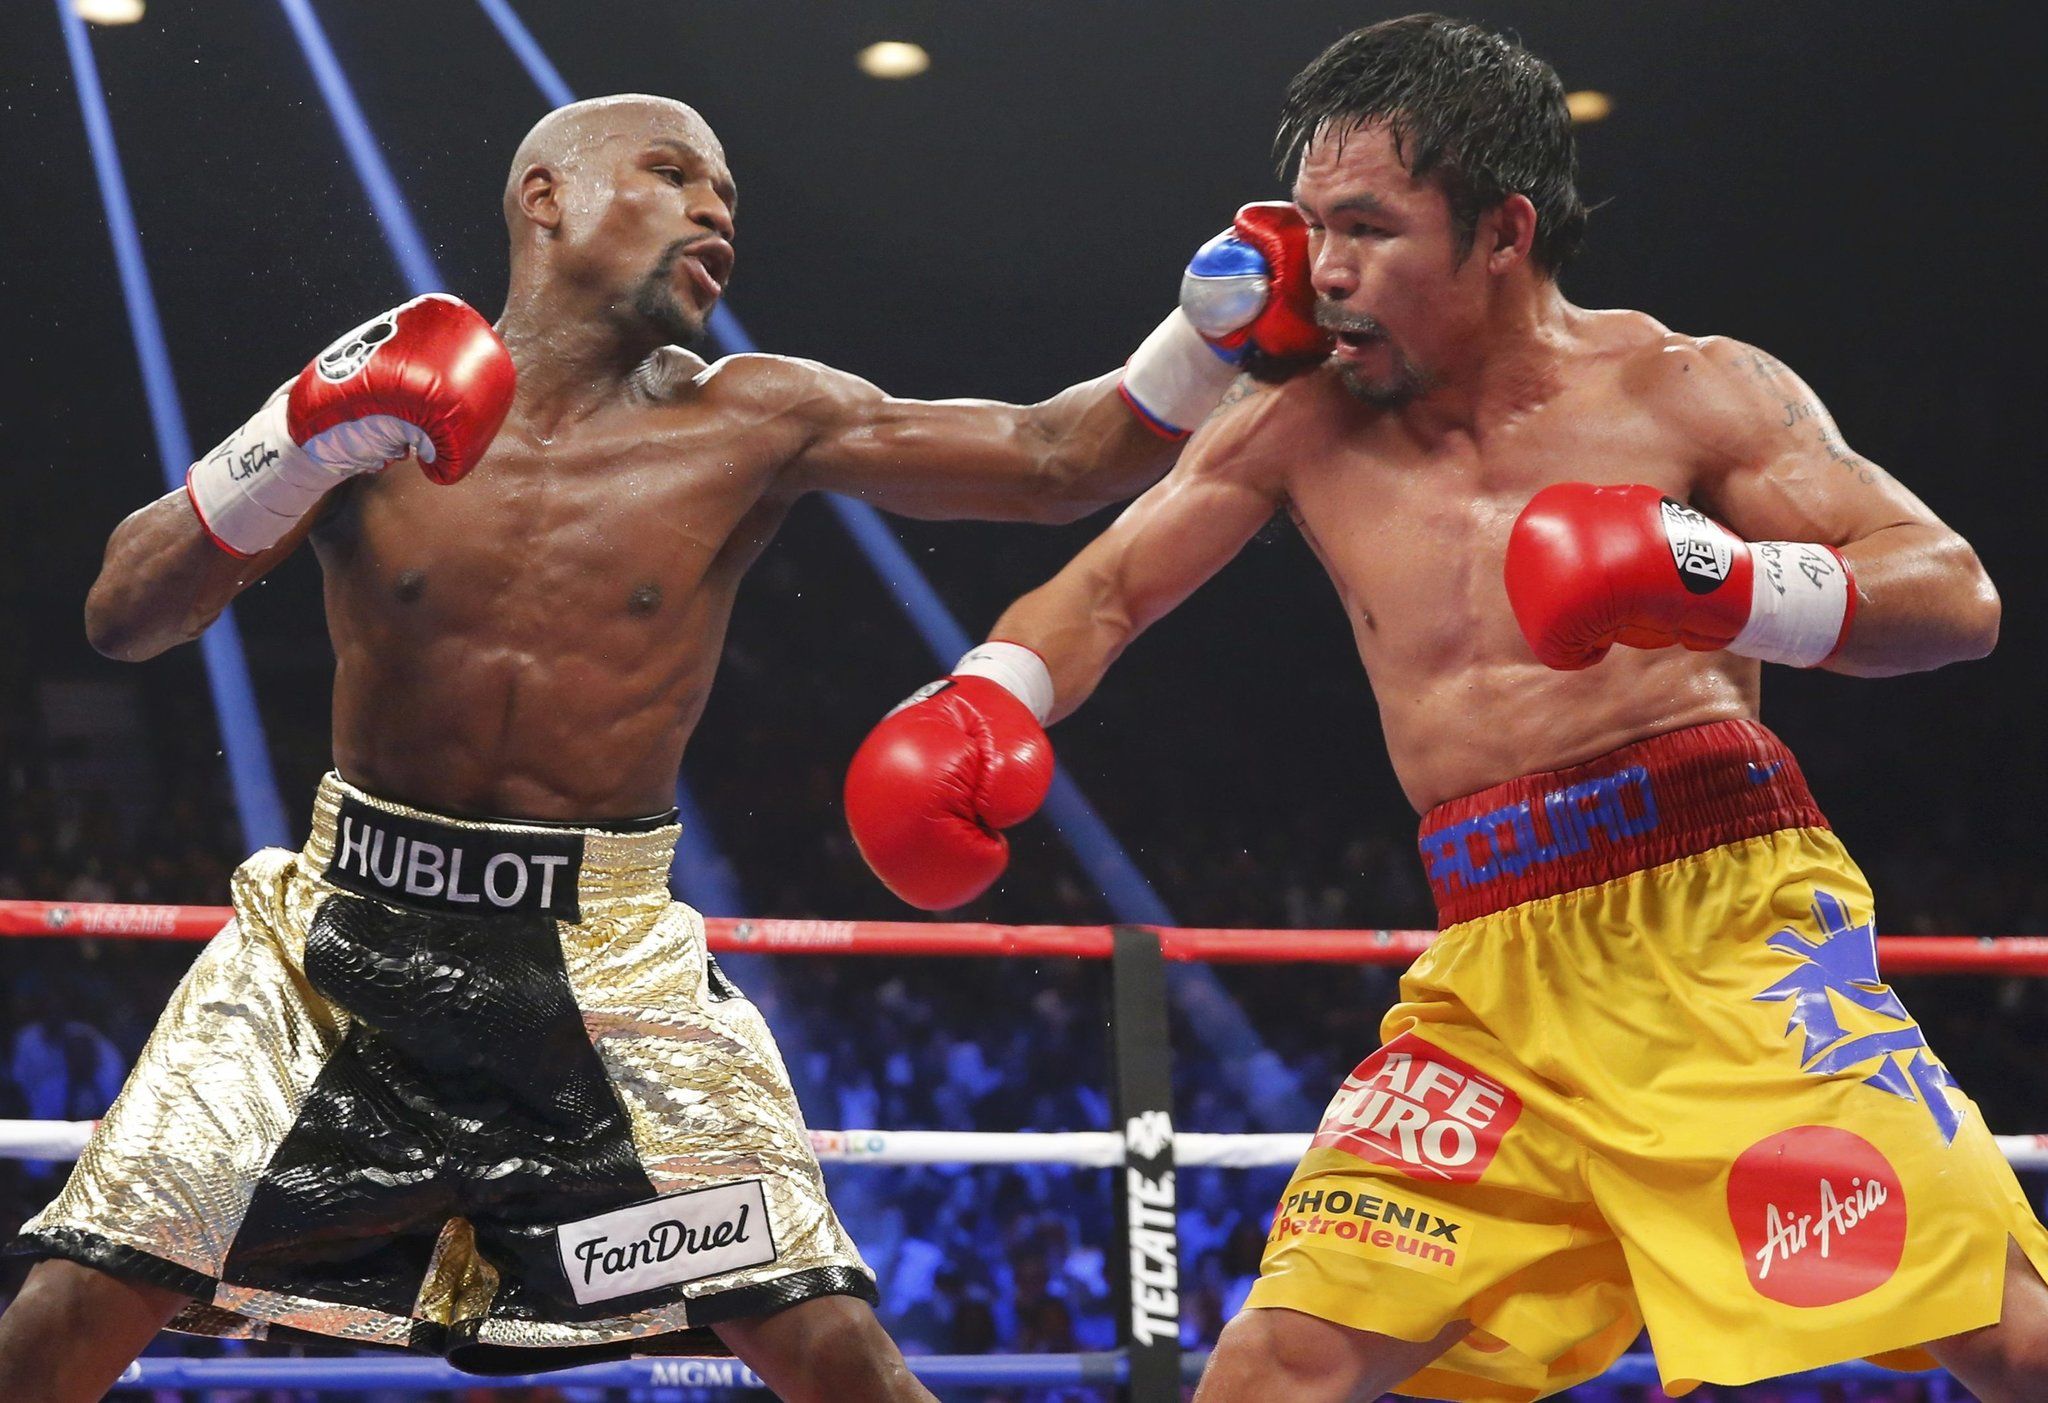 Mayweather answers Pacquiao's challenge: There was an opportunity to fight when it really mattered